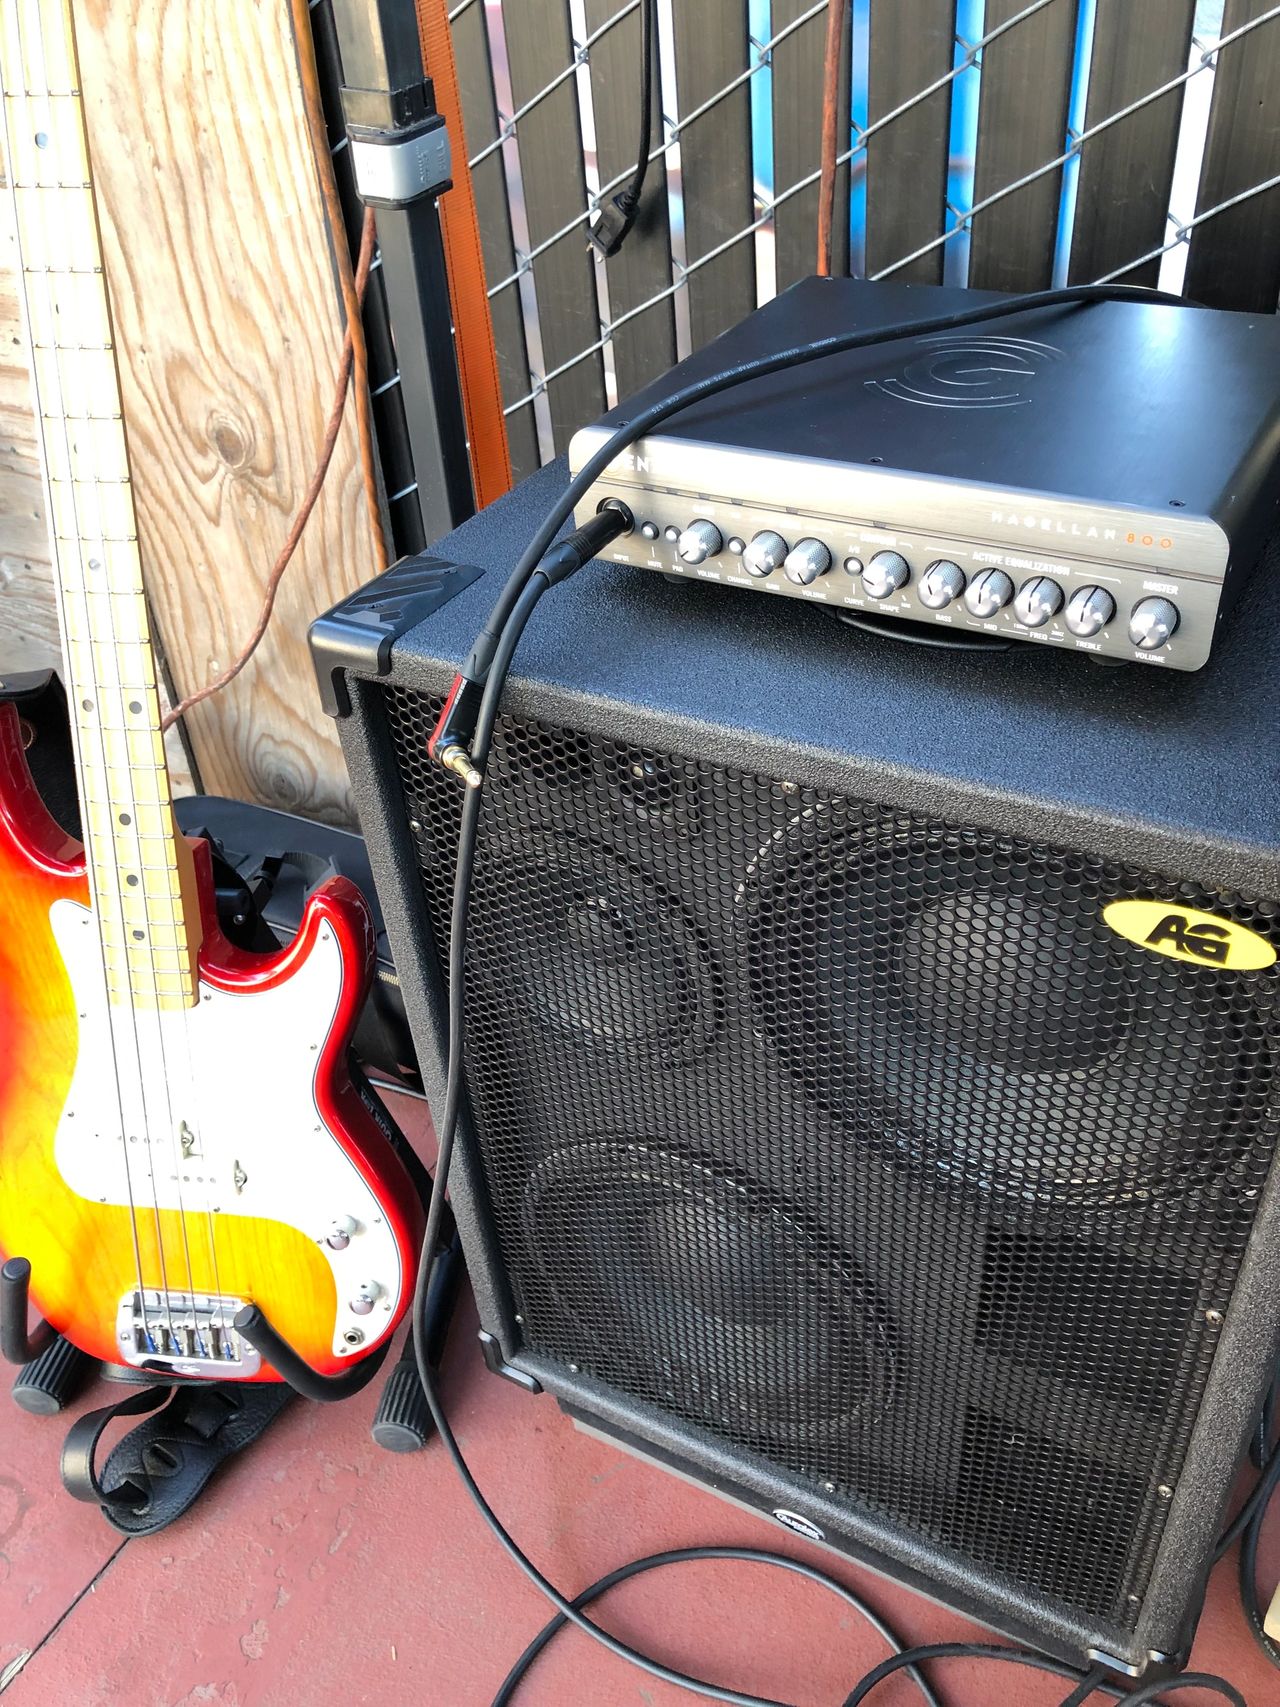 Bass Guitar Speaker Tone, and “Filling a Room.”